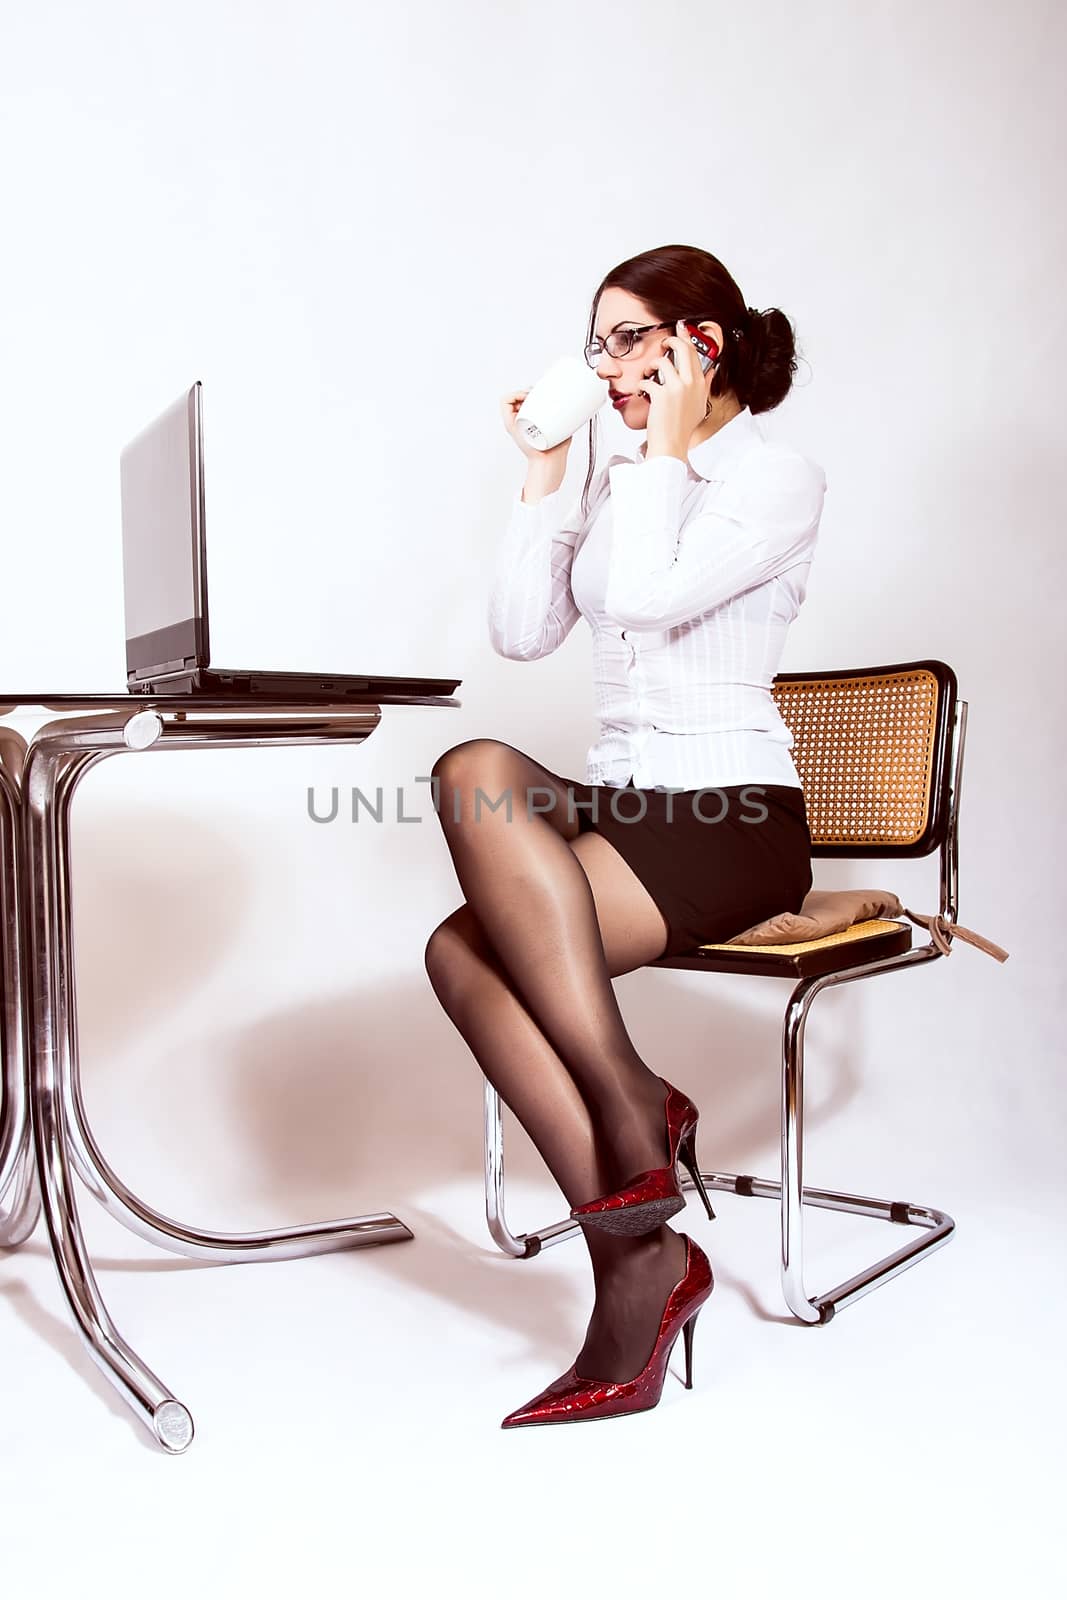 Businesswoman sitting at desk working on a computer by dukibu